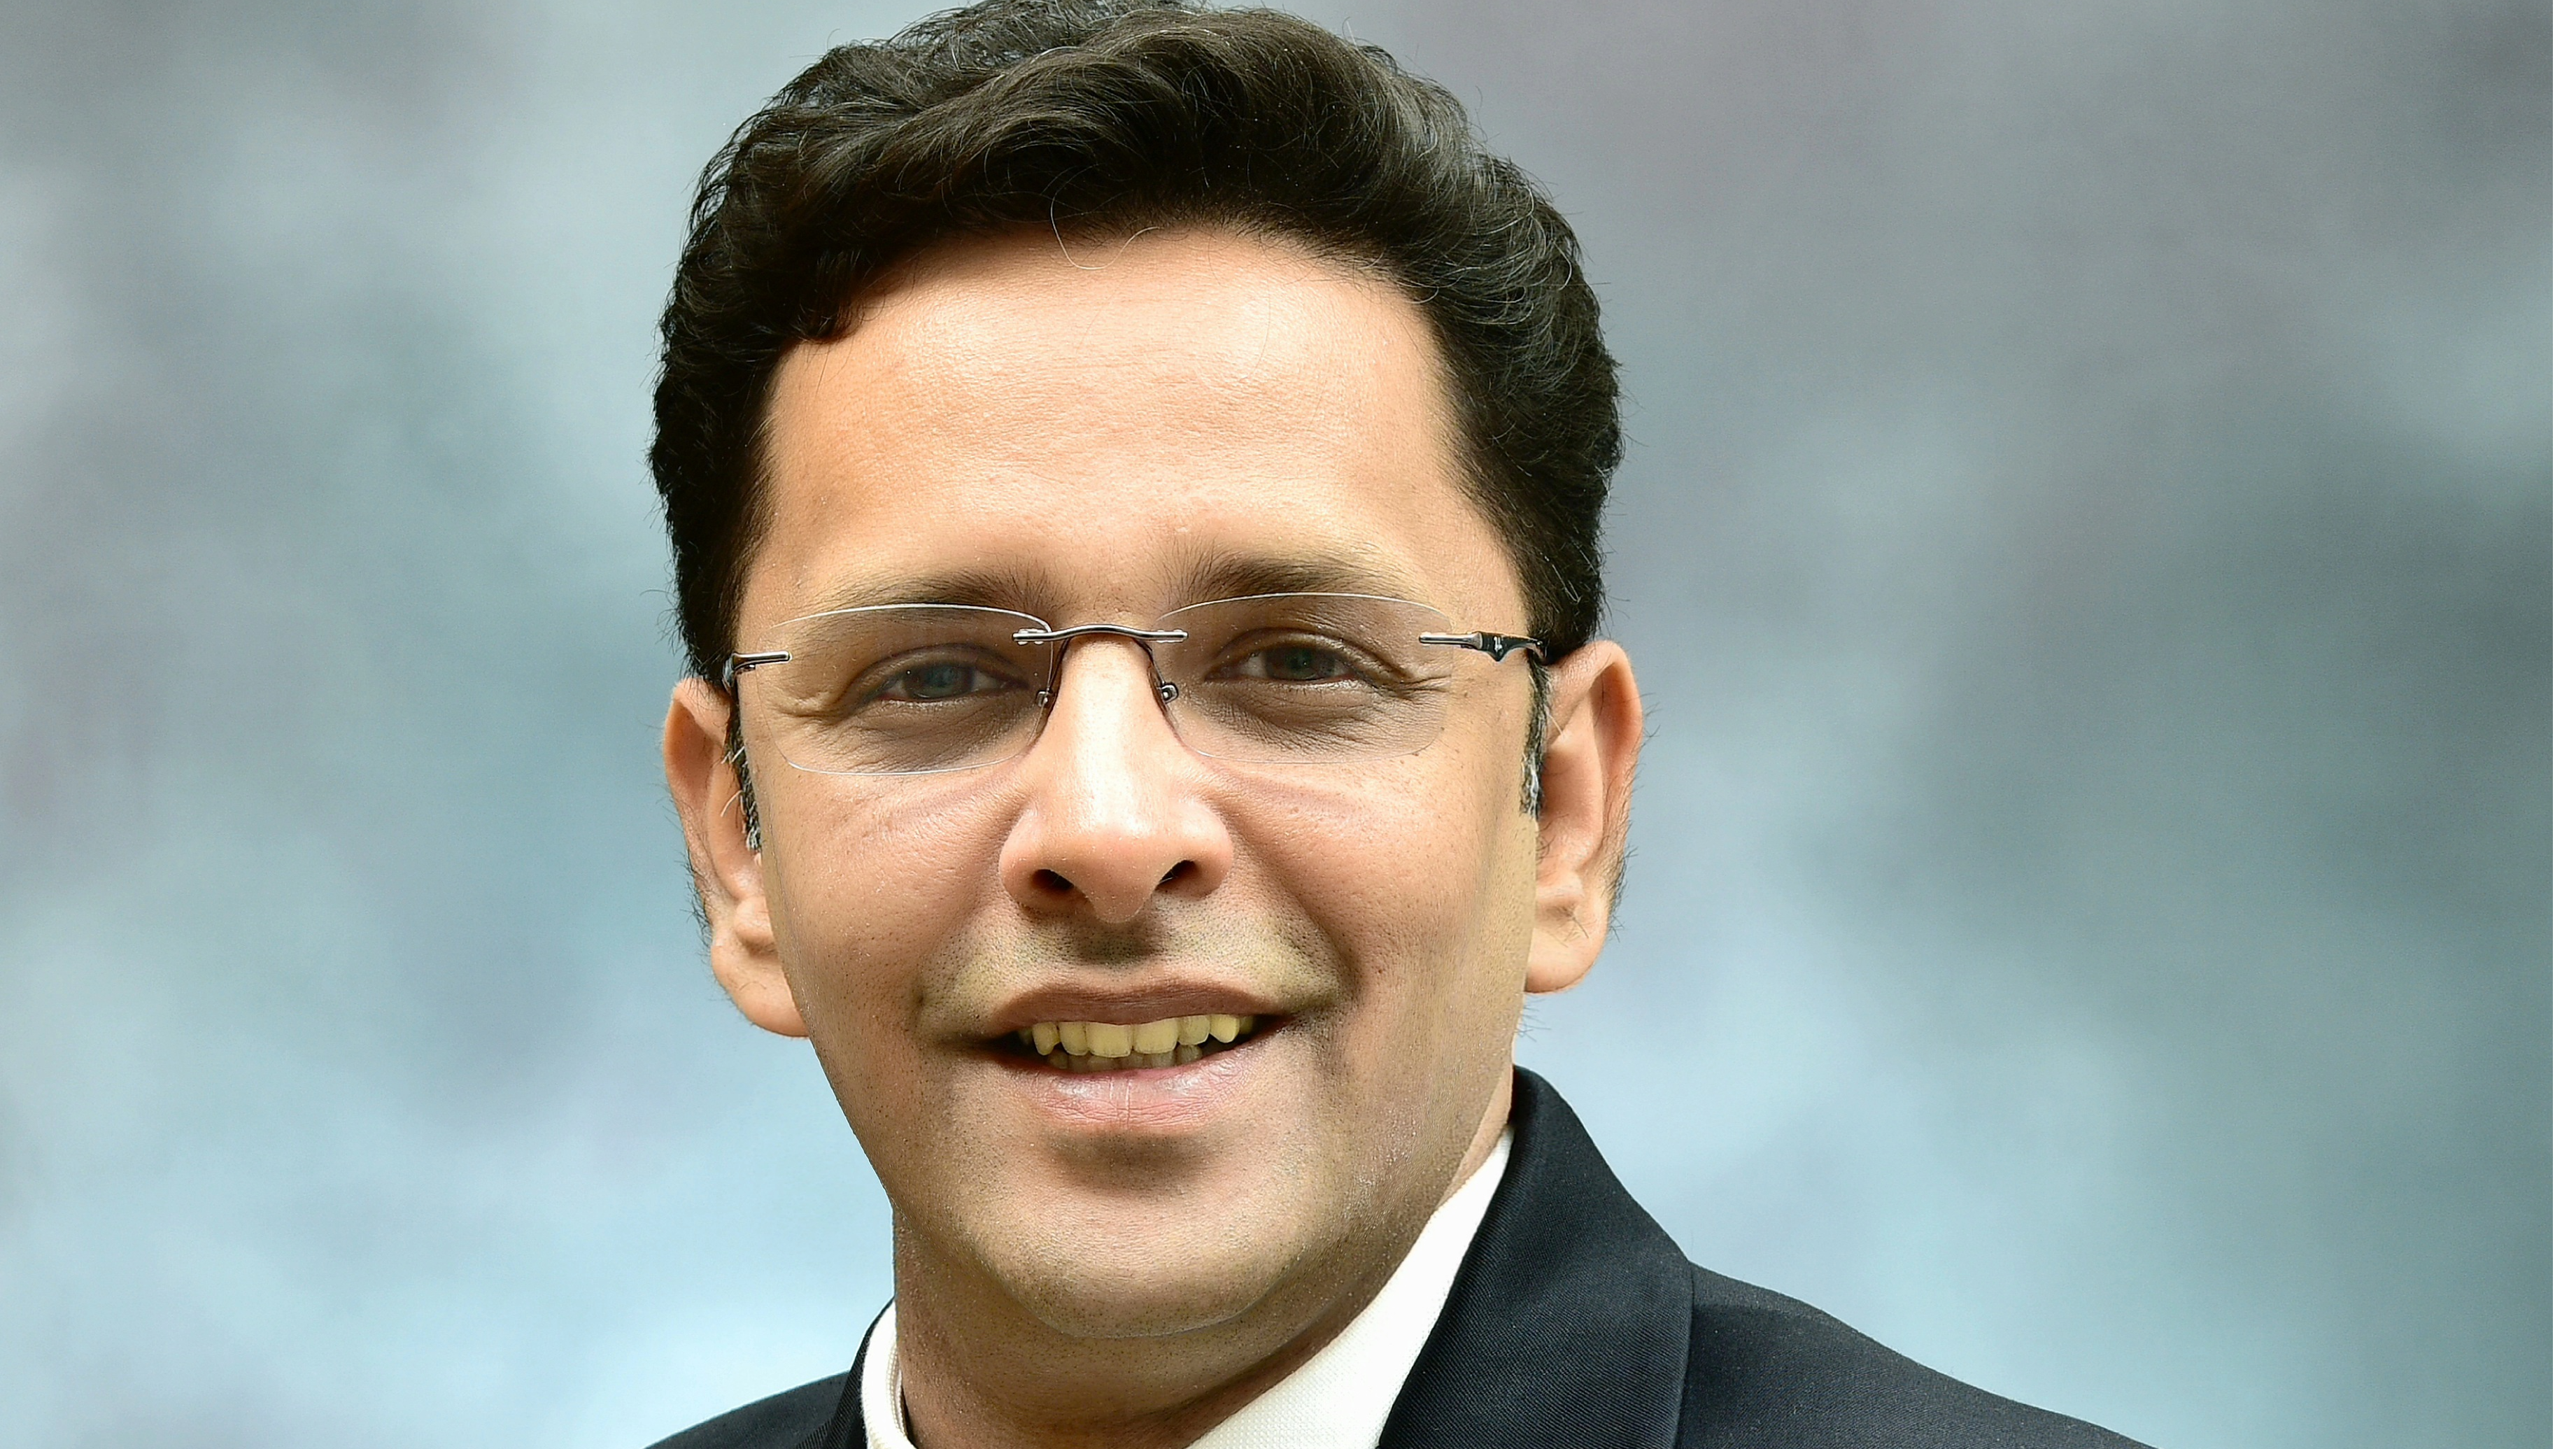 https://adgully.me/post/2590/prakash-jain-appointed-as-group-cfo-for-buzzworks-innovations-group